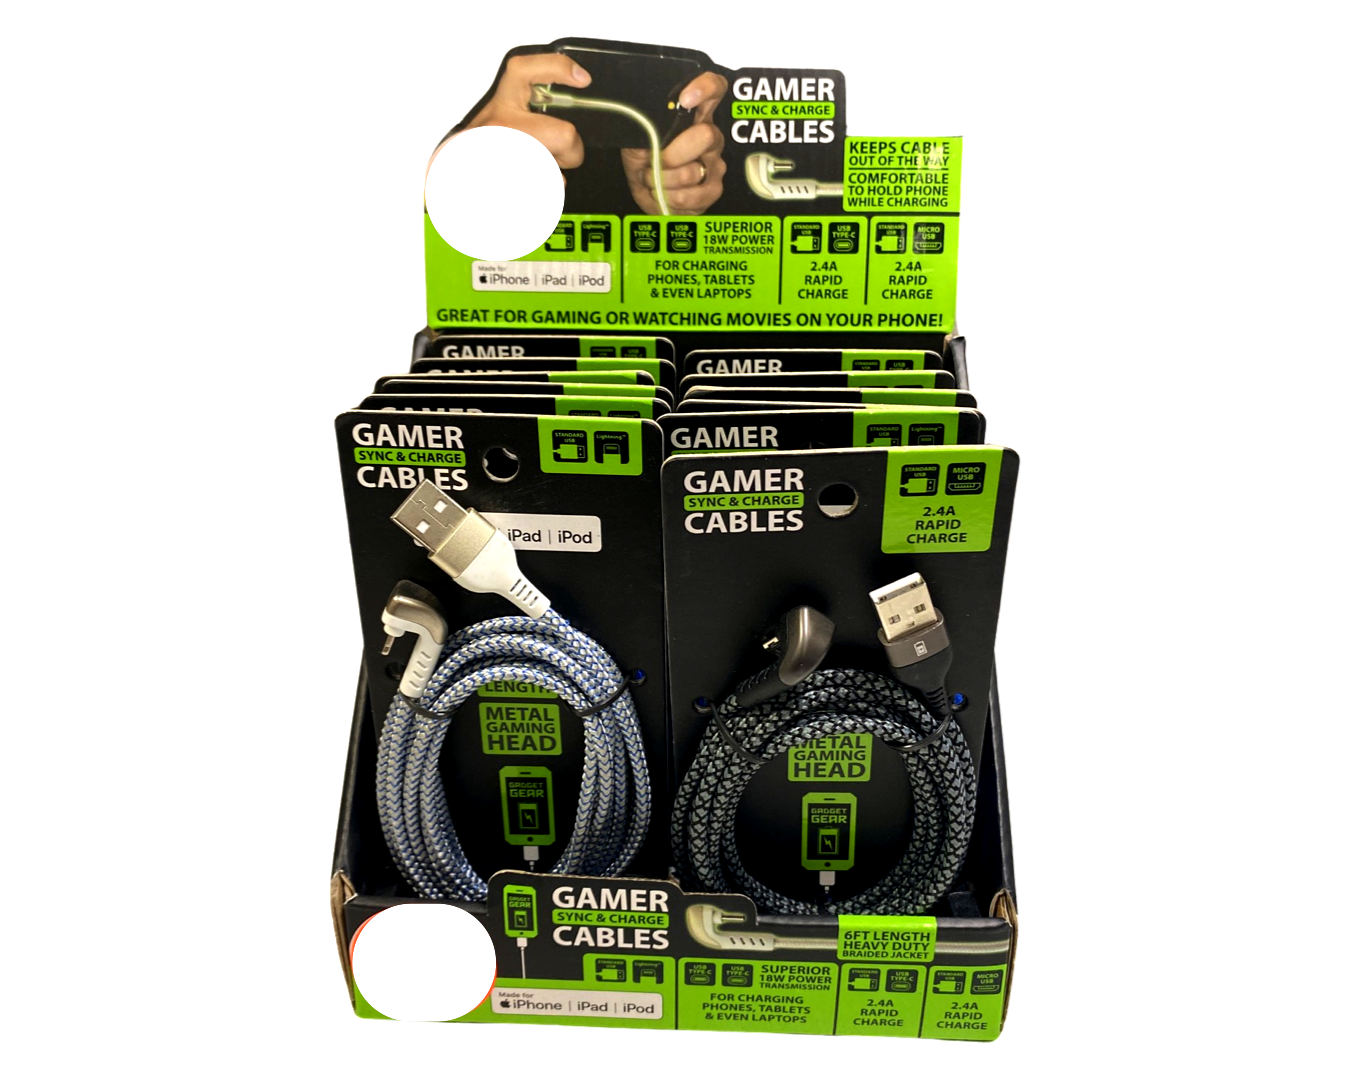 ITEM NUMBER 088258 6FT GAMER CABLE VARIETY 12 PIECES PER DISPLAY